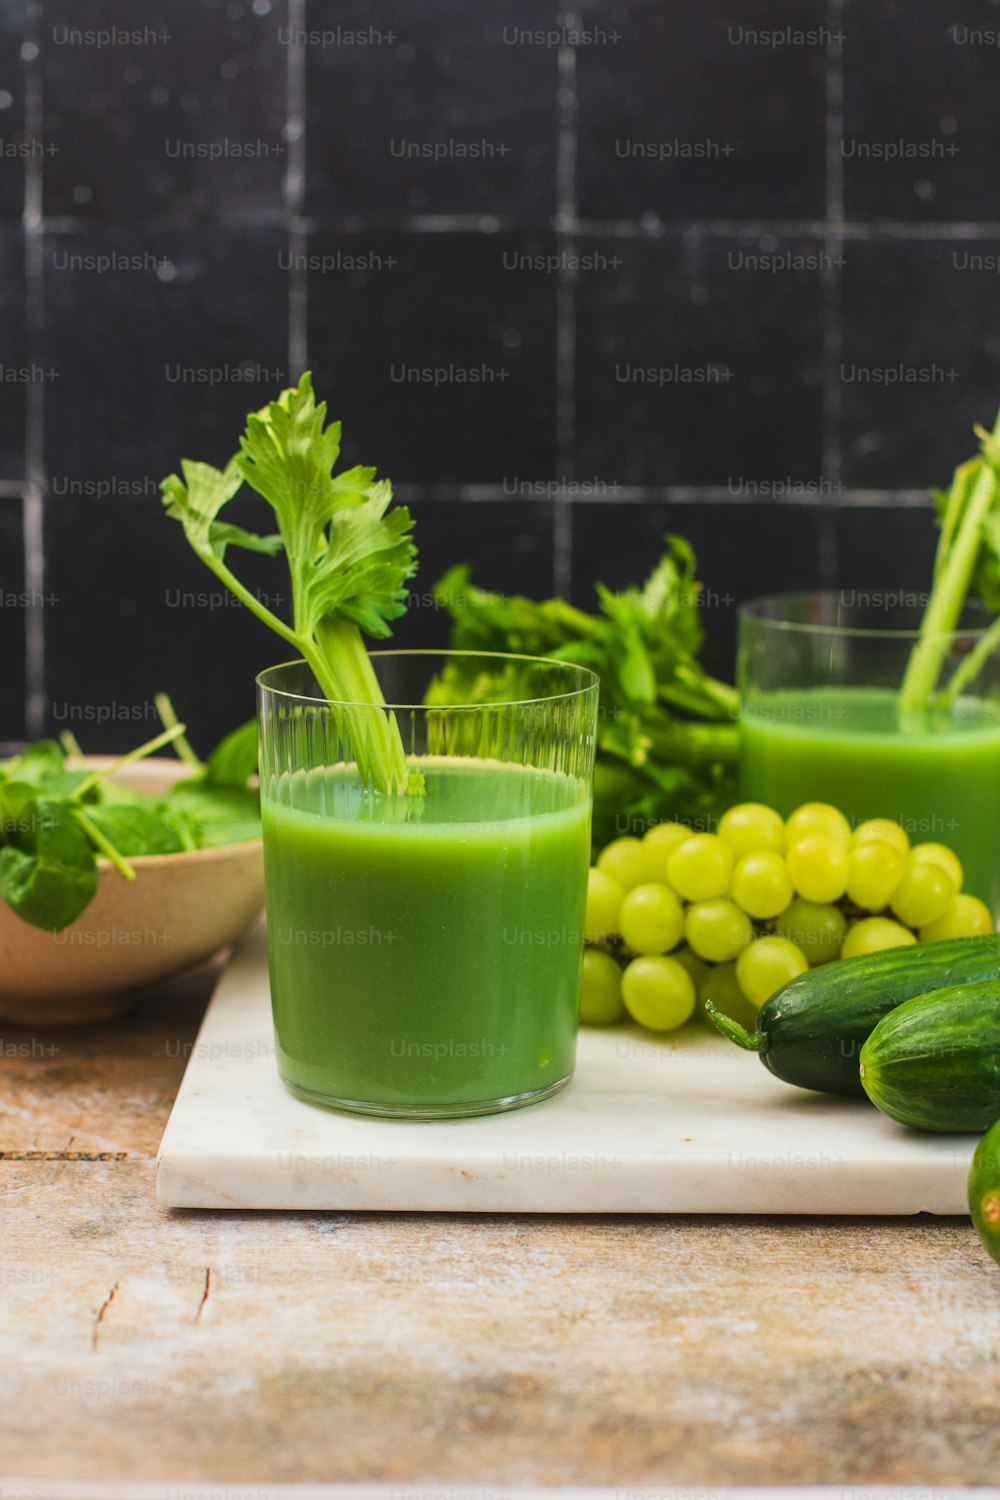 a glass of green juice next to a bowl of grapes and cucumbers